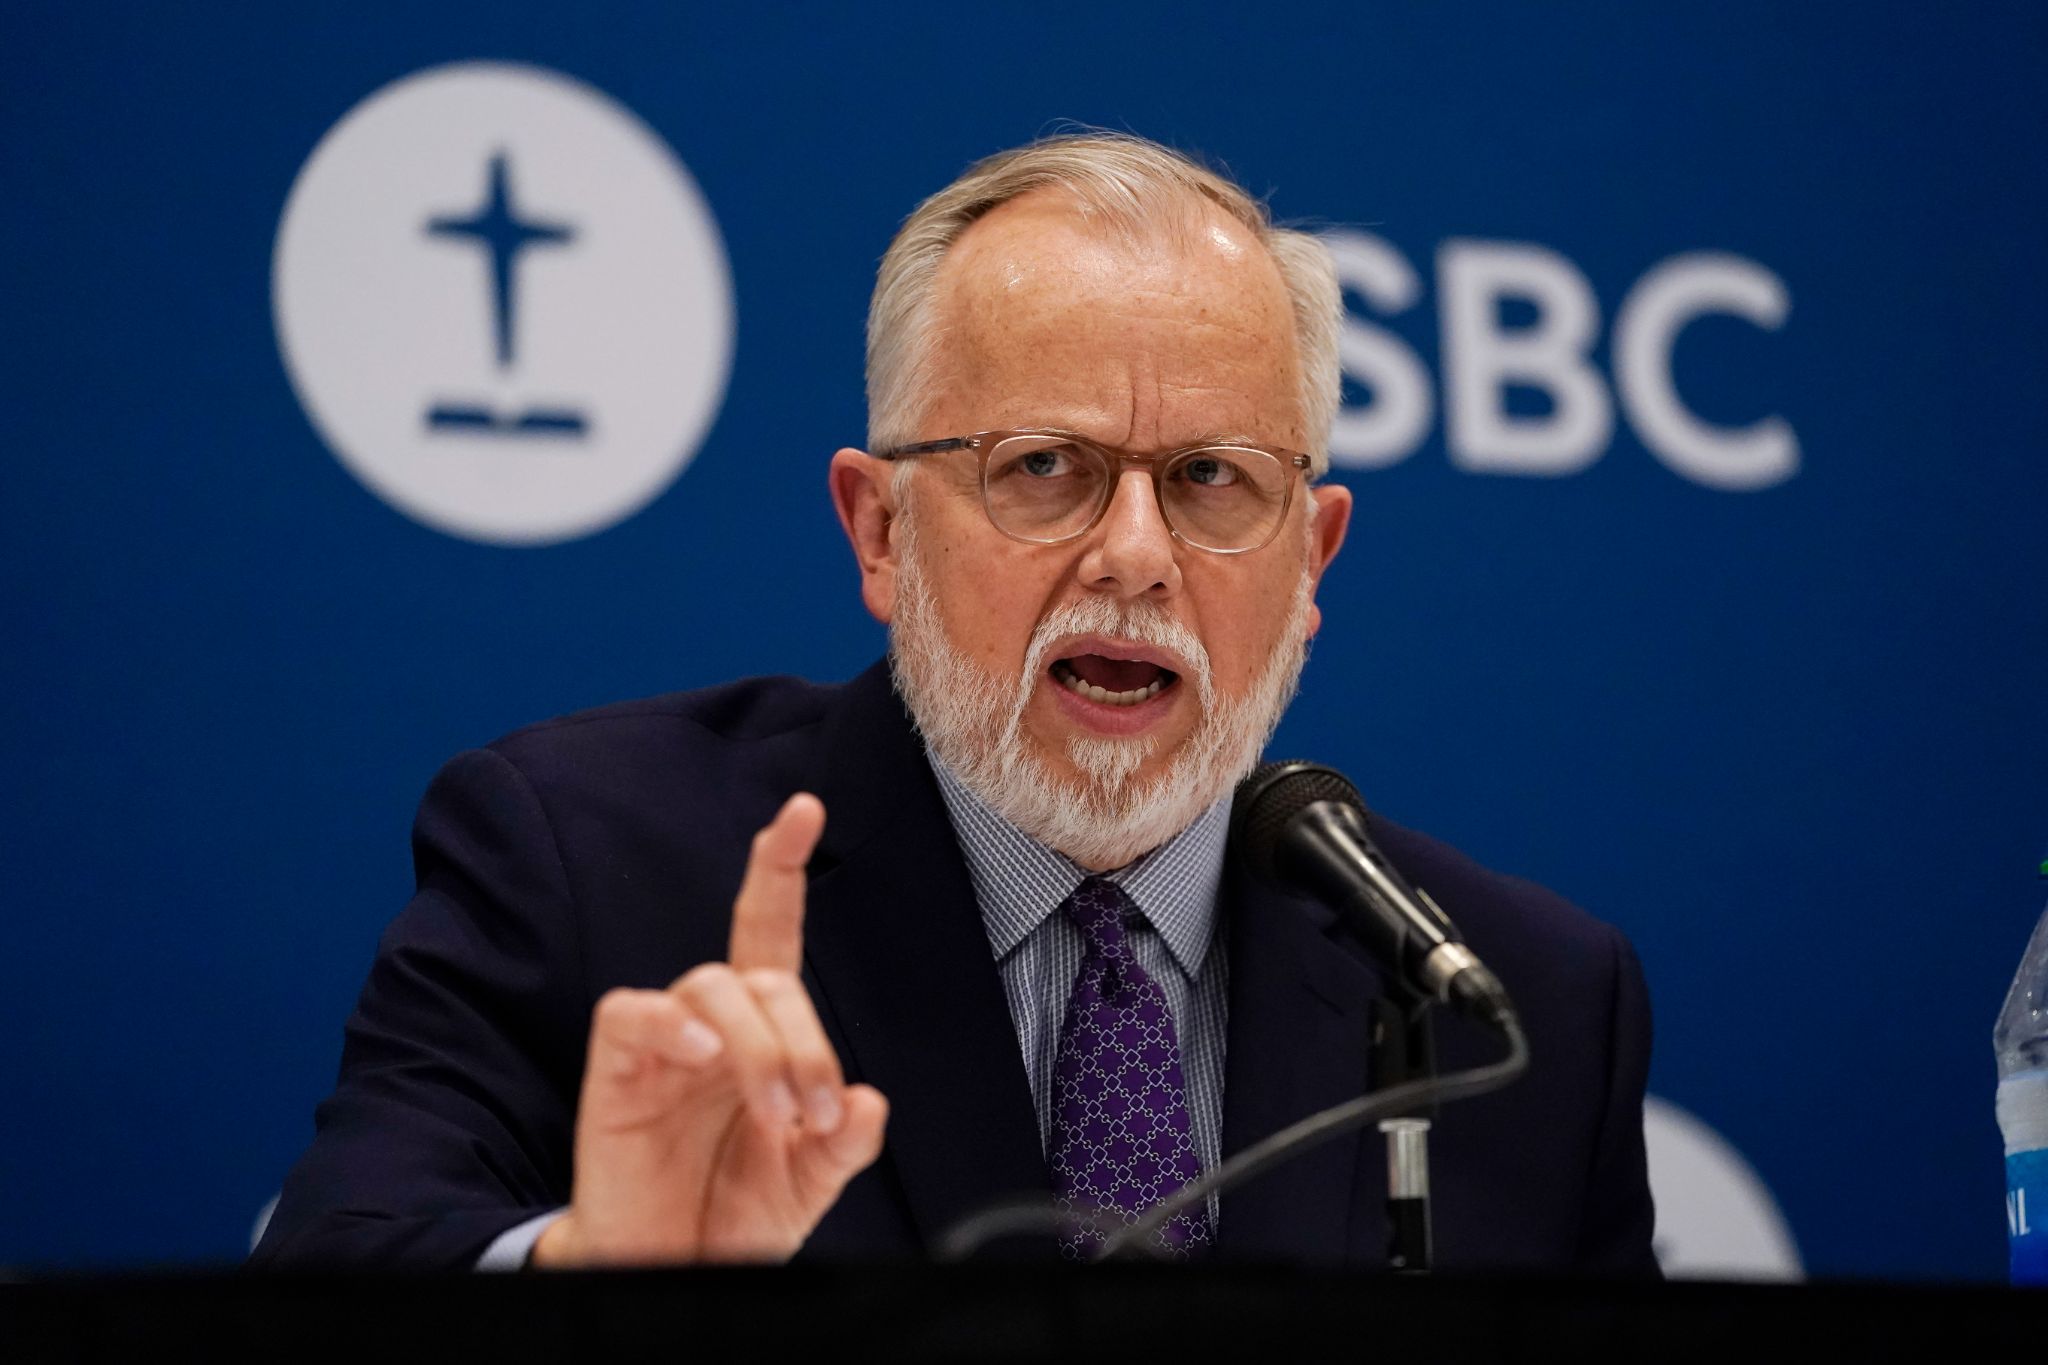 Inside the troubling report on the Southern Baptist Convention